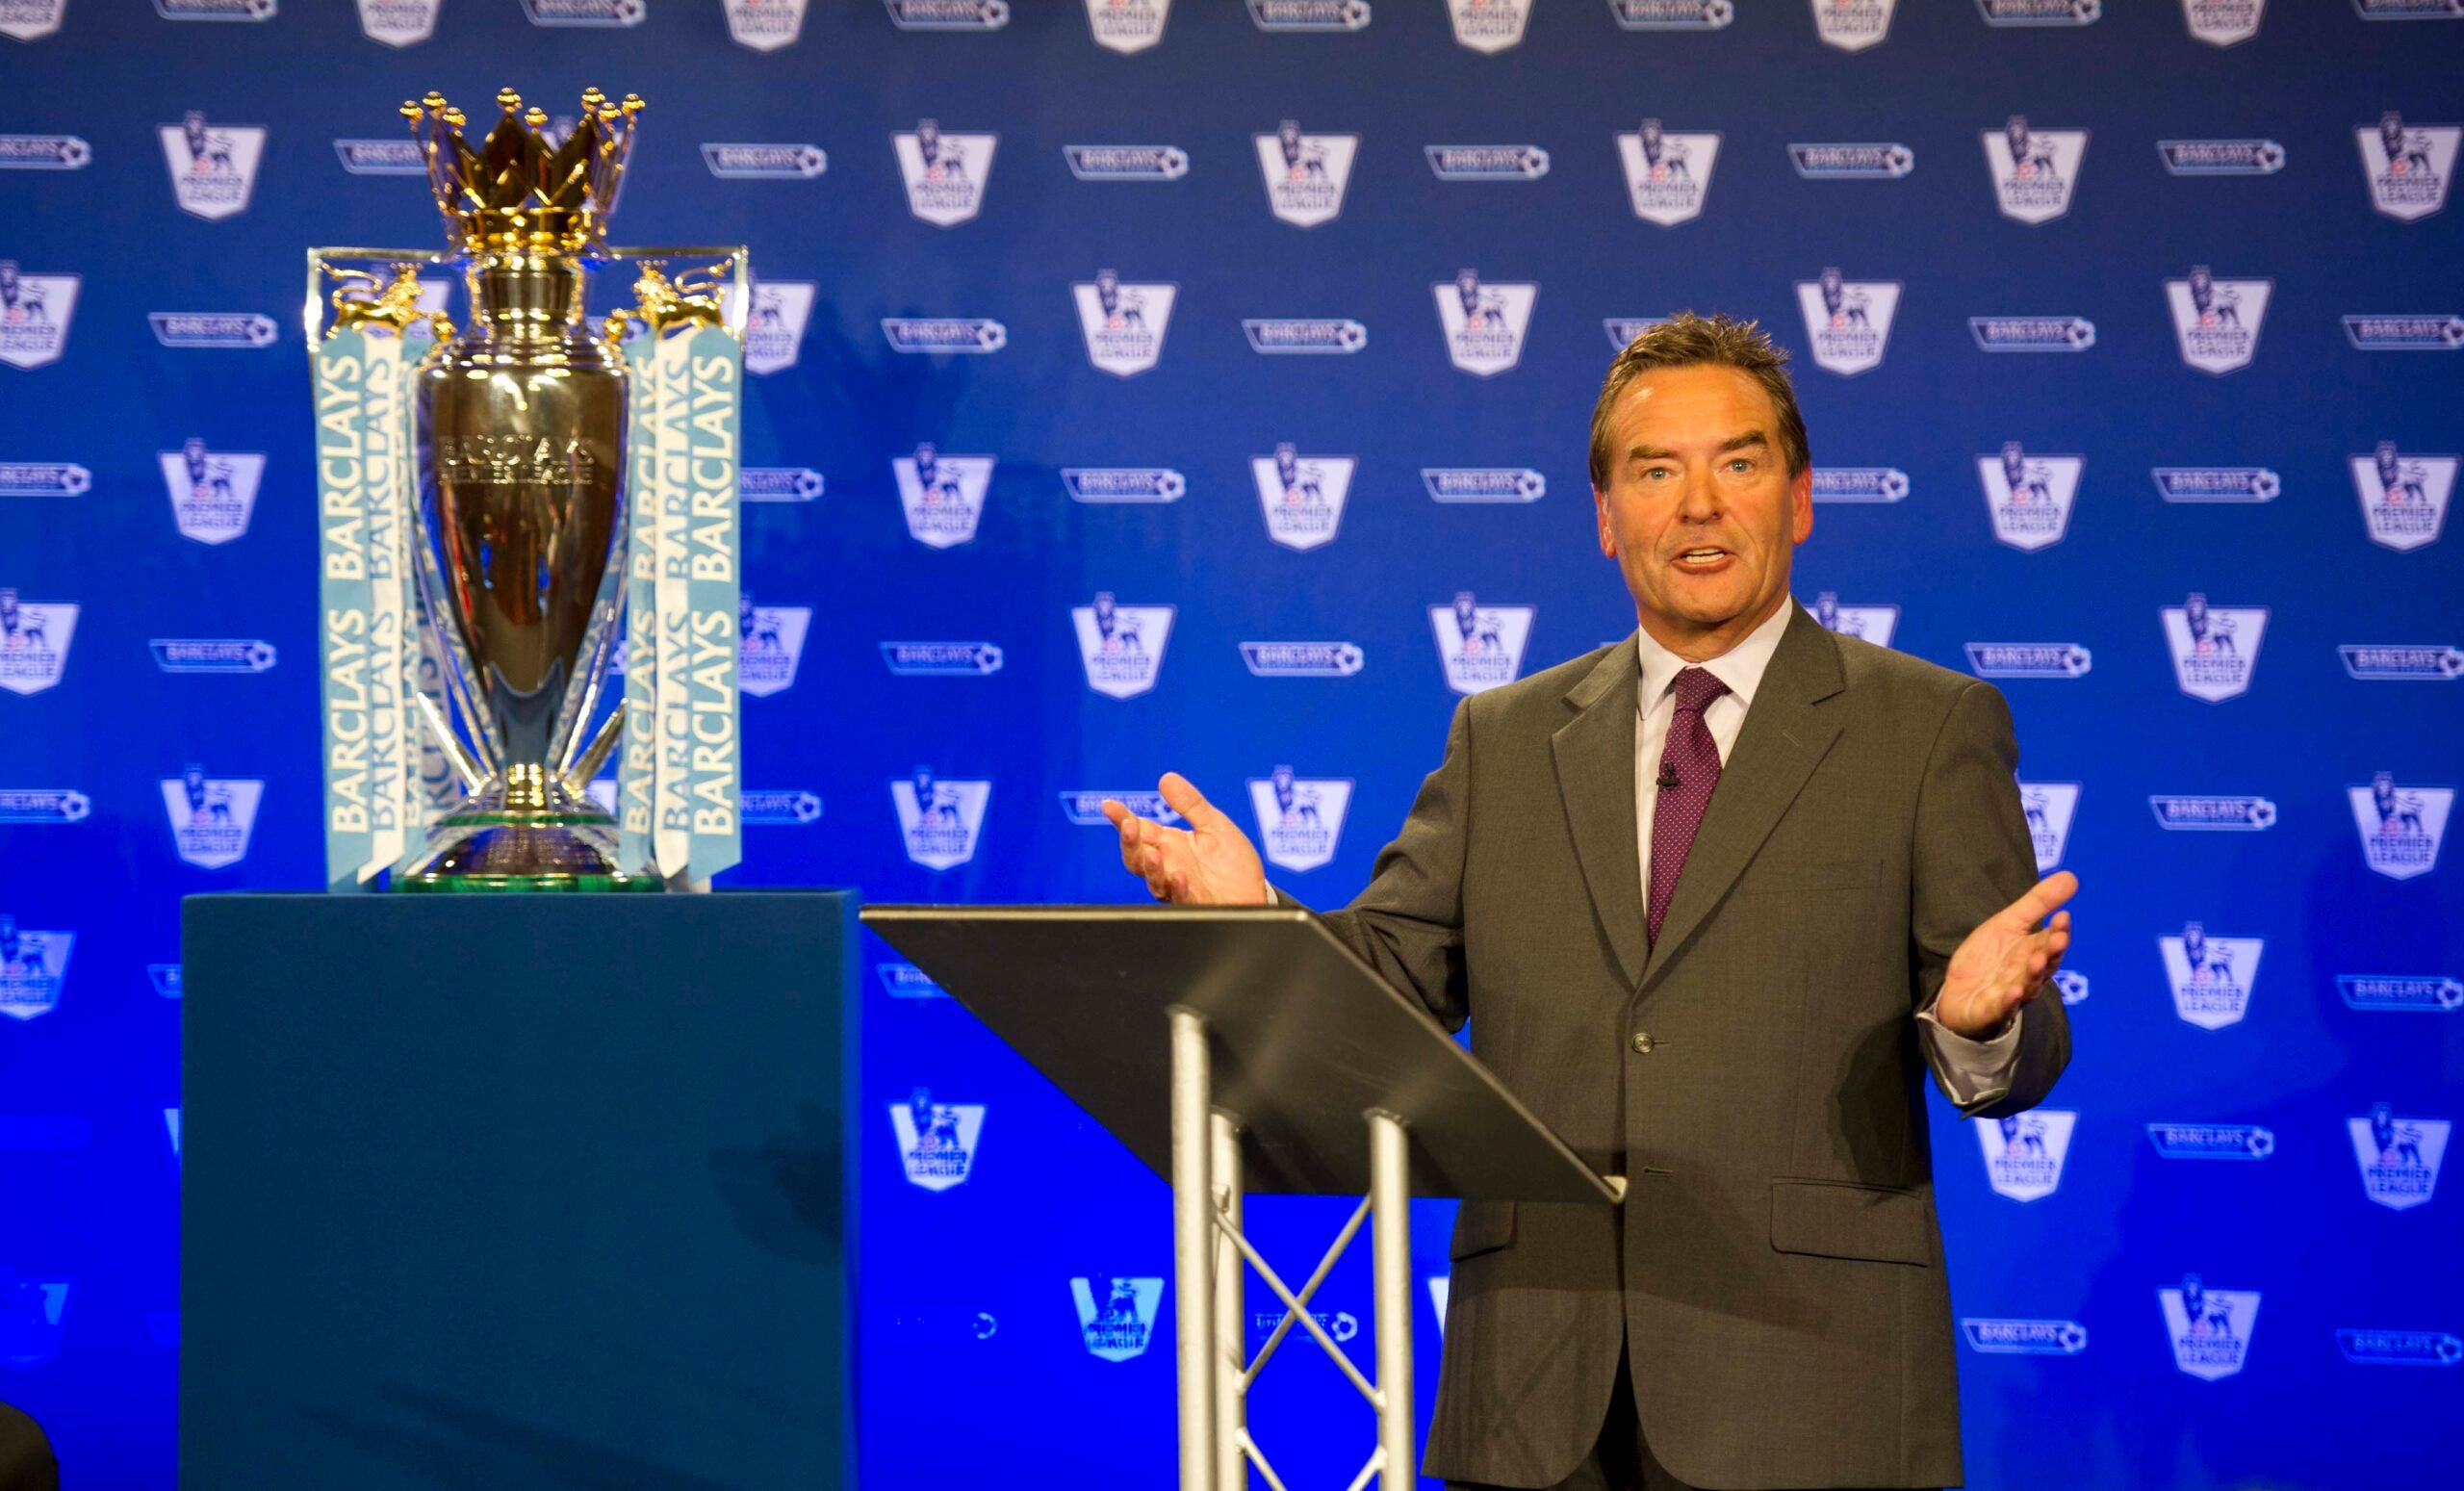 Football - Barclays Premier League Trophy Tour and Launch - Manchester - 16/8/12 
Sky Sports TV presenter Jeff Stelling during the Barclays Premier League Trophy Tour and Launch 
Mandatory Credit: Action Images / The Barclays Premier League via Action Images / Ben Duffy 
Livepic